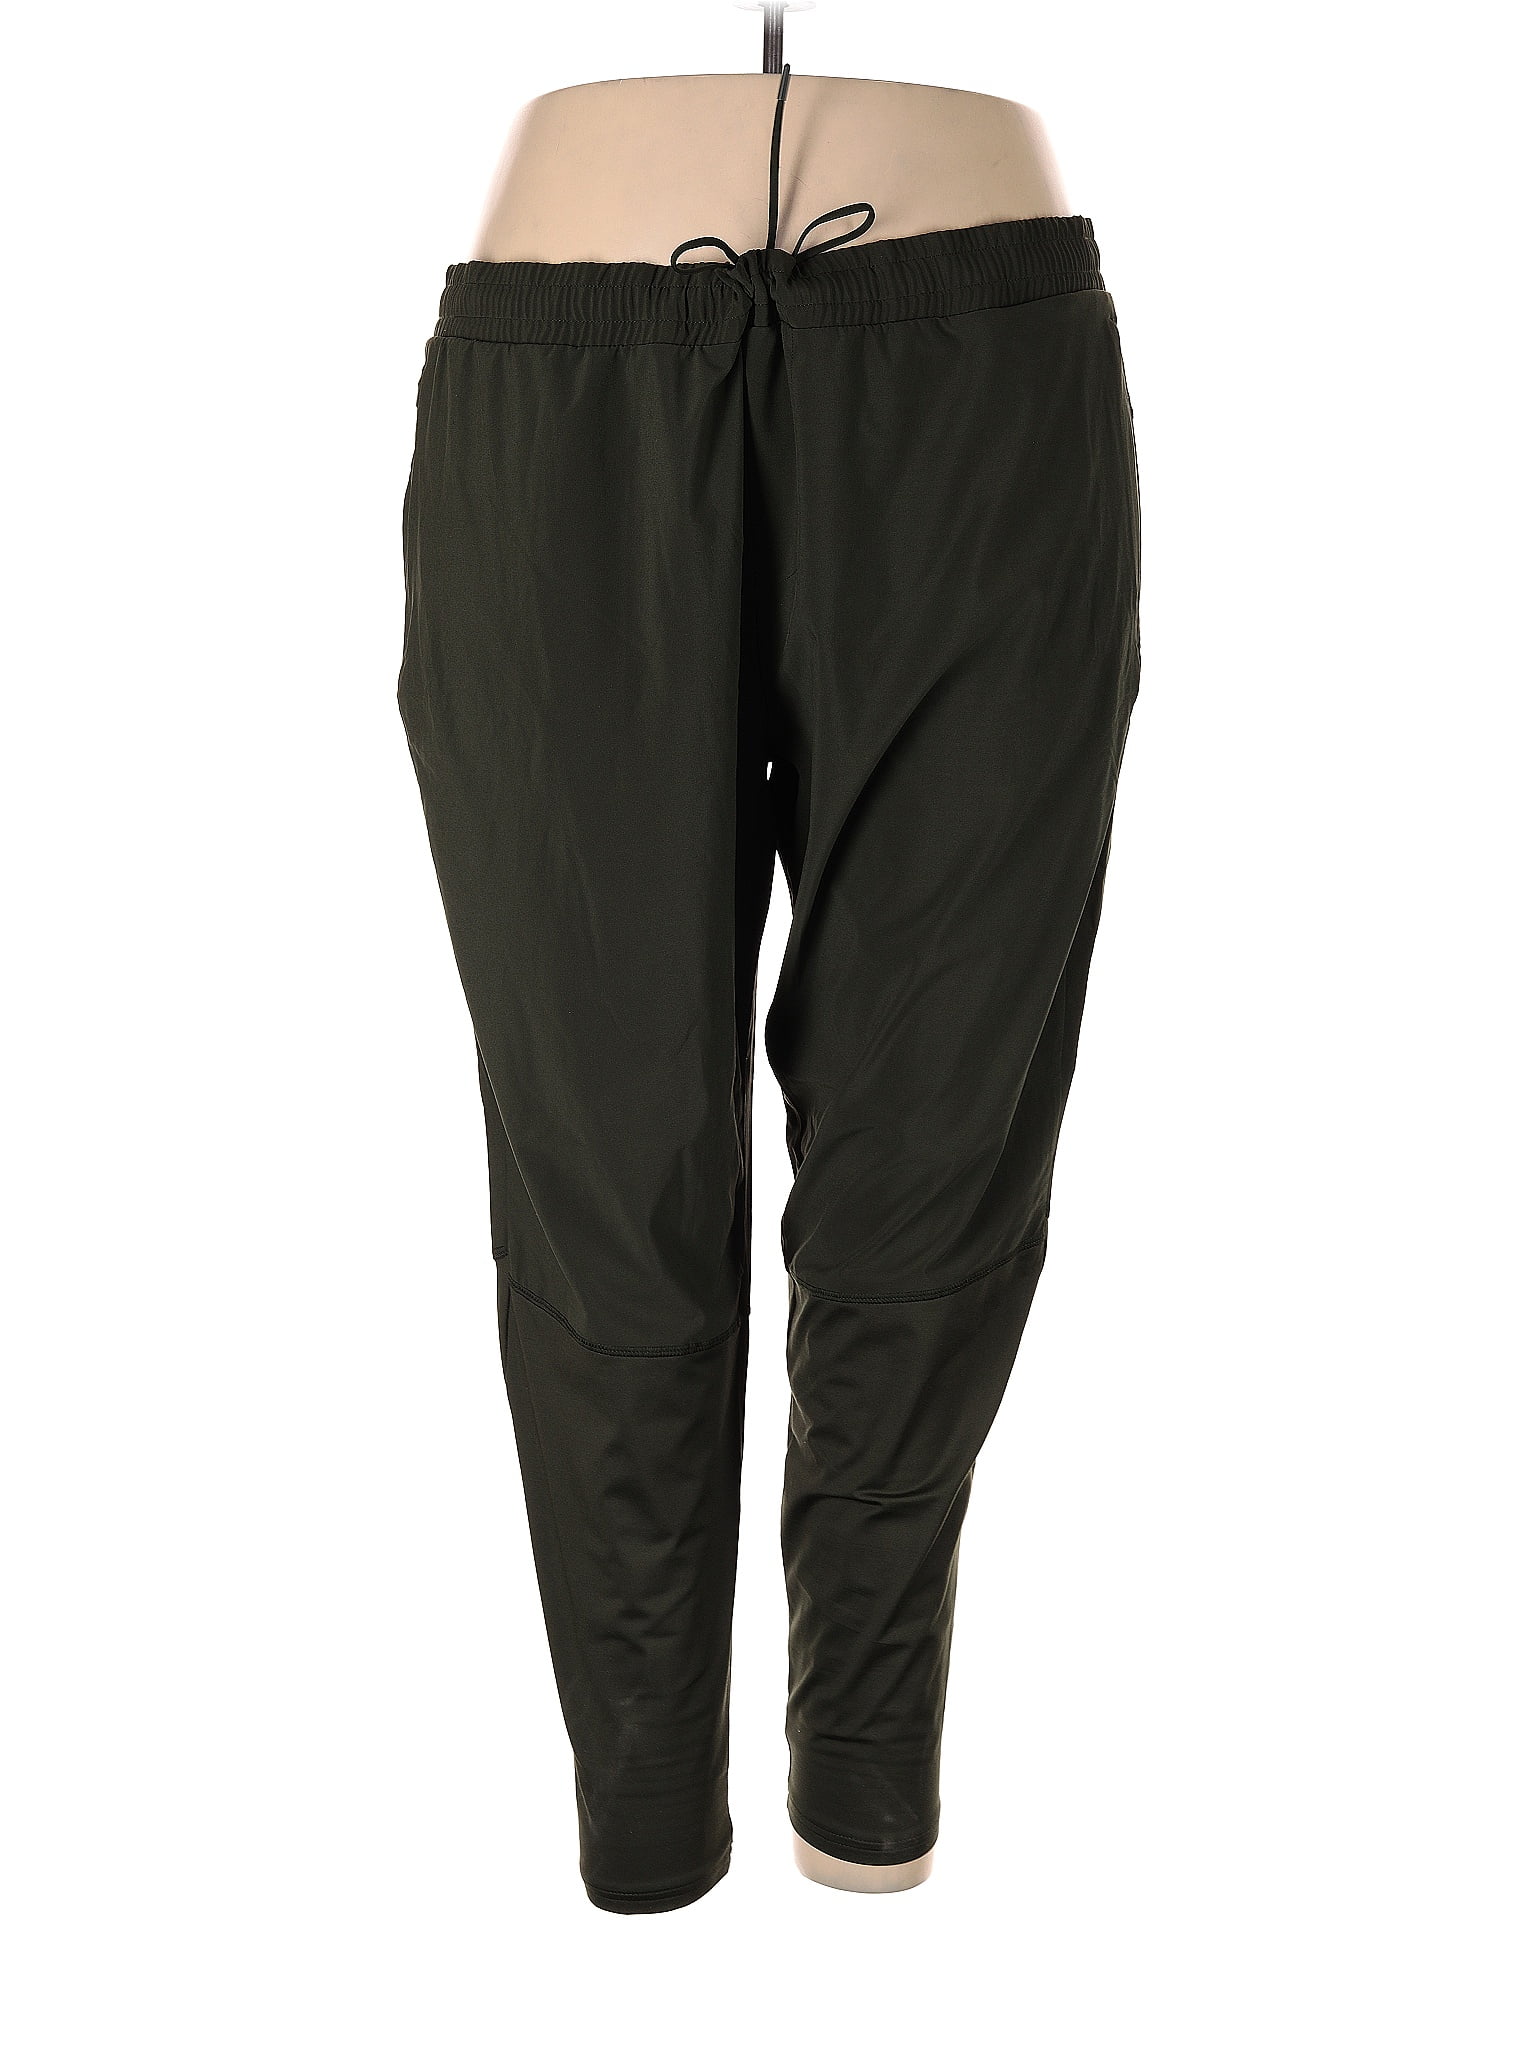 NVGTN Leggings Green Size XS - $22 (54% Off Retail) - From Meredith